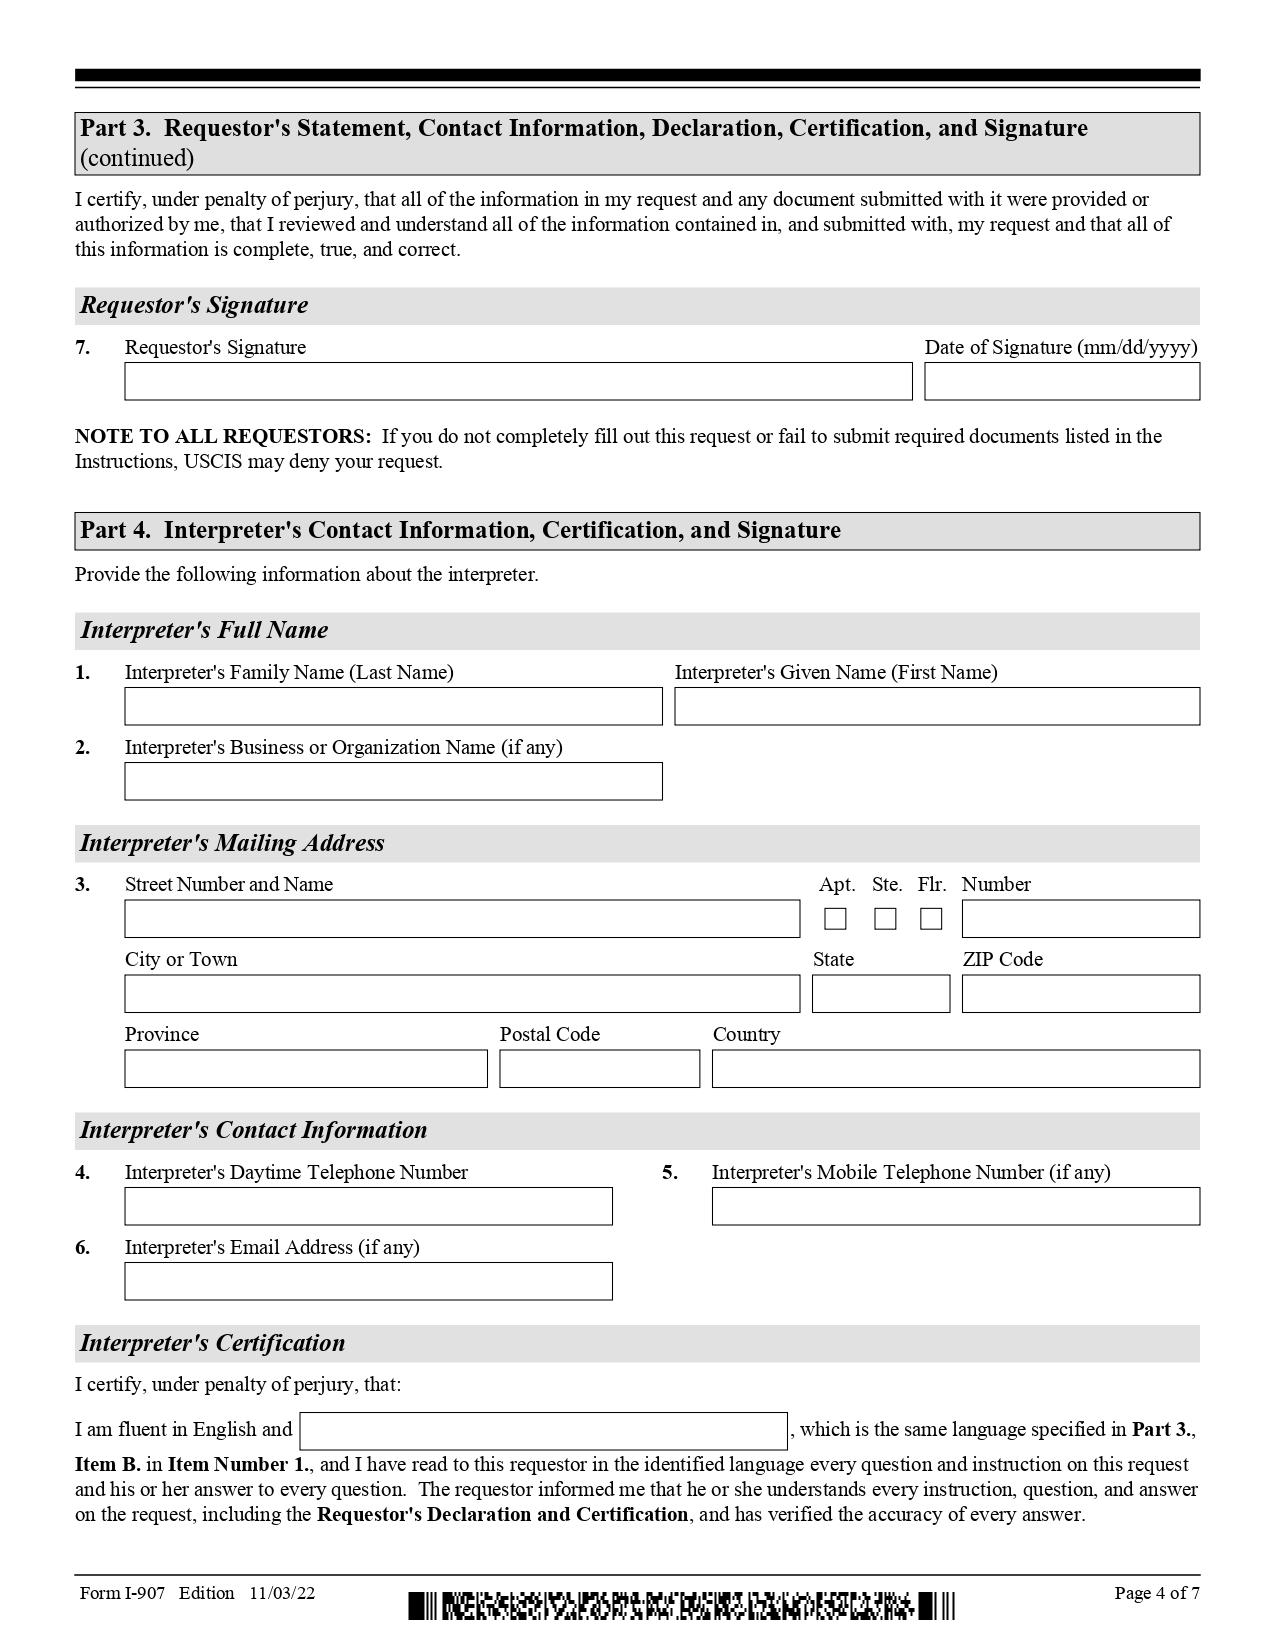 I 907 Form Page 4